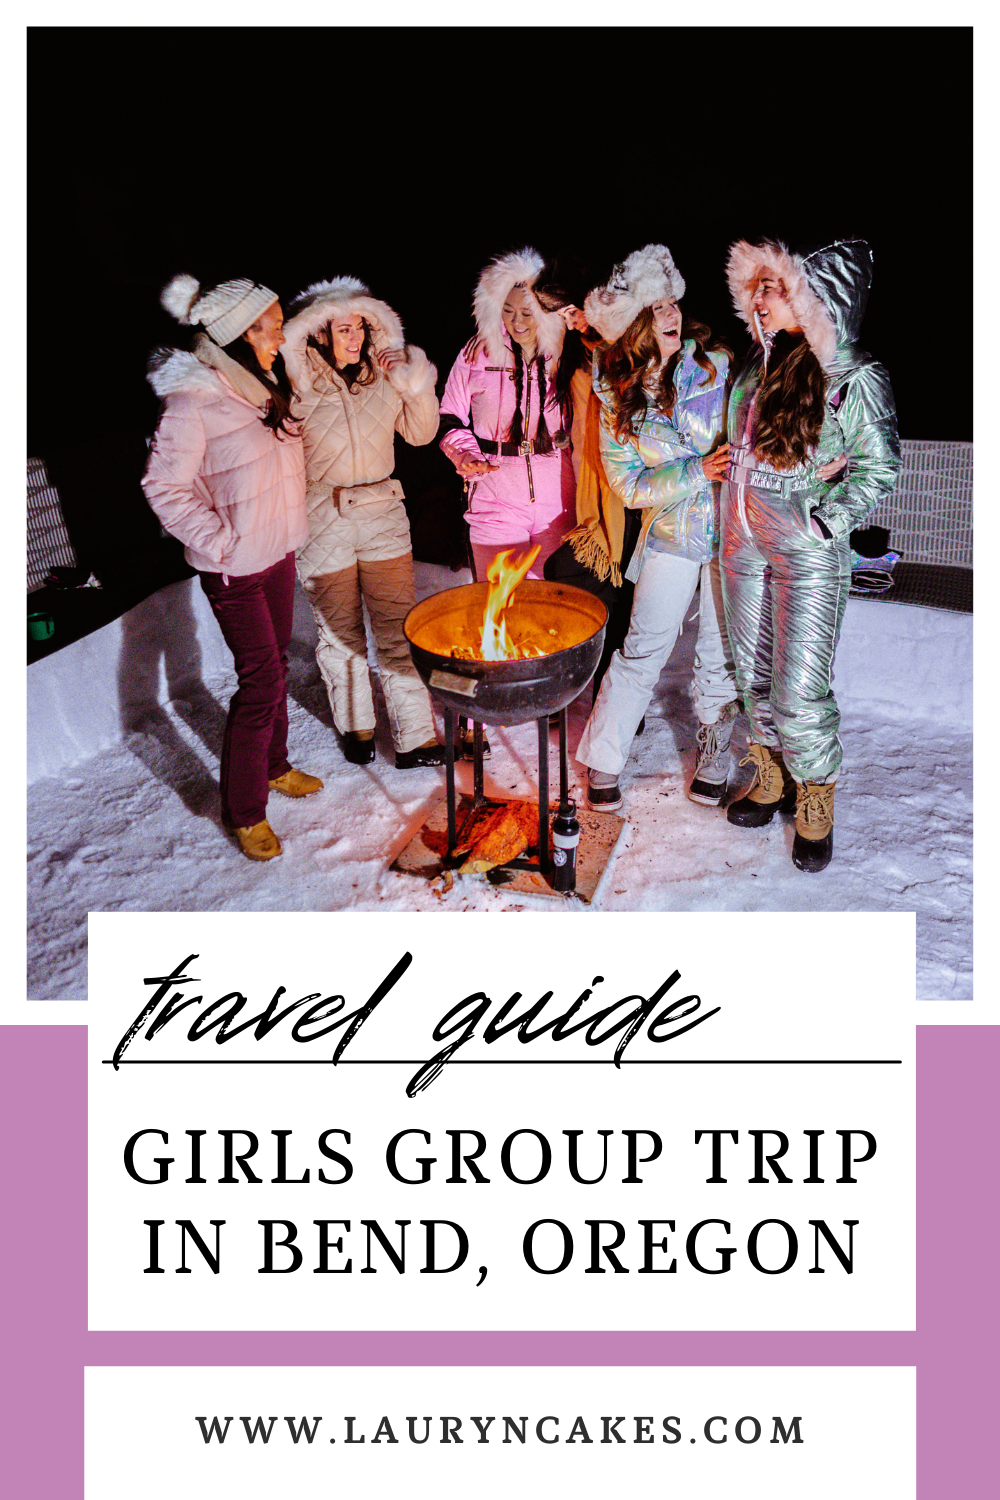 text overlay says, "travel guide girls group trip in bend, oregon" image of 6 women at night in front of a fire wearing snow gear